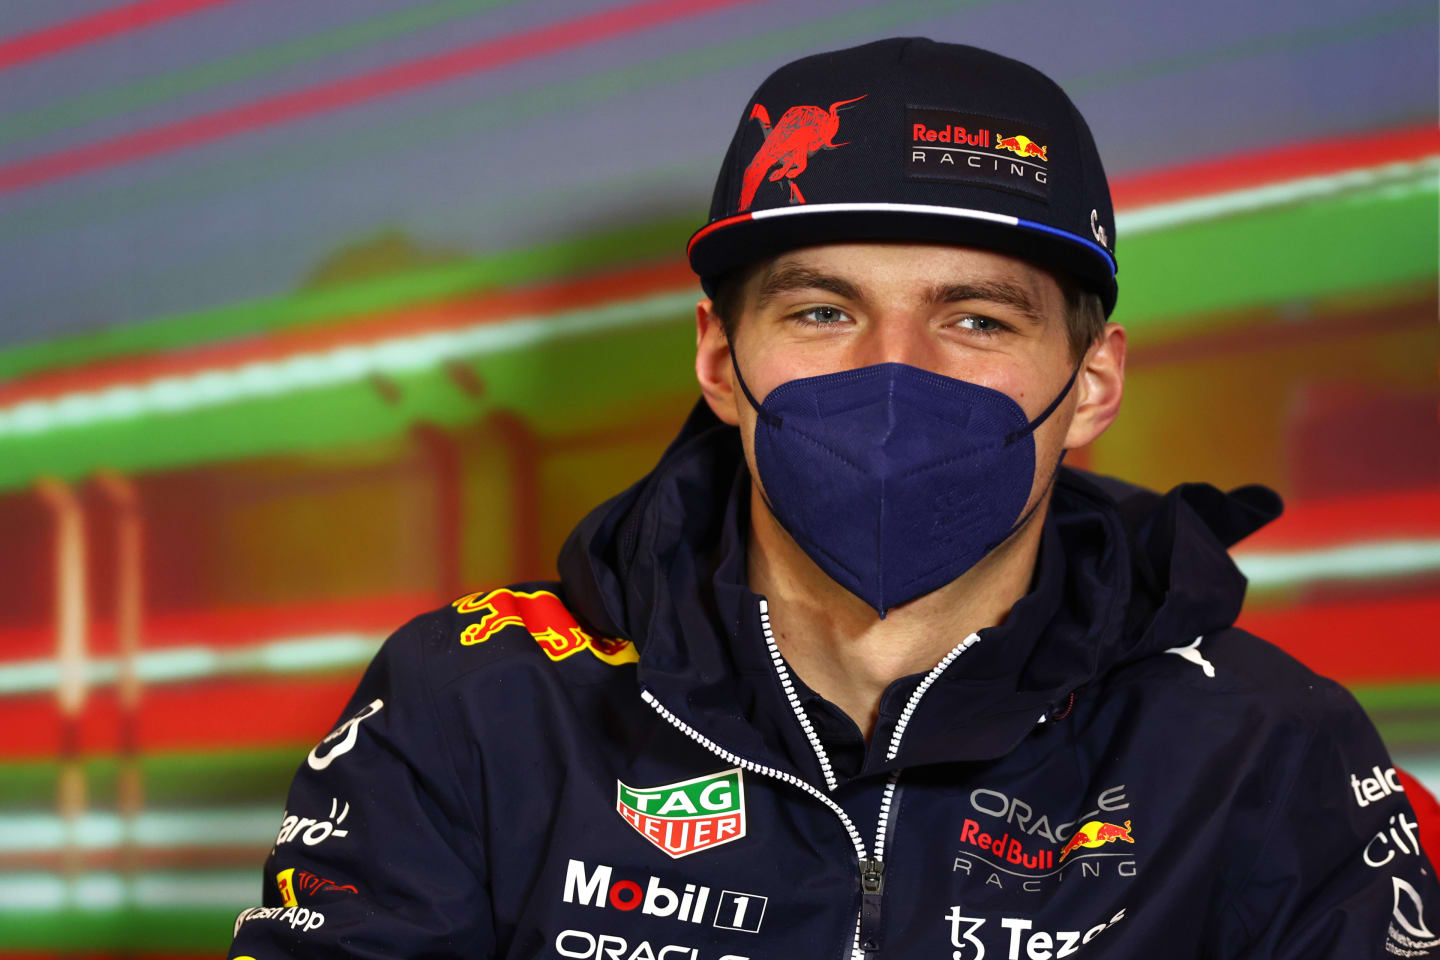 IMOLA, ITALY - APRIL 22: Max Verstappen of the Netherlands and Oracle Red Bull Racing talks in the Drivers Press Conference prior to practice ahead of the F1 Grand Prix of Emilia Romagna at Autodromo Enzo e Dino Ferrari on April 22, 2022 in Imola, Italy. (Photo by Lars Baron/Getty Images)